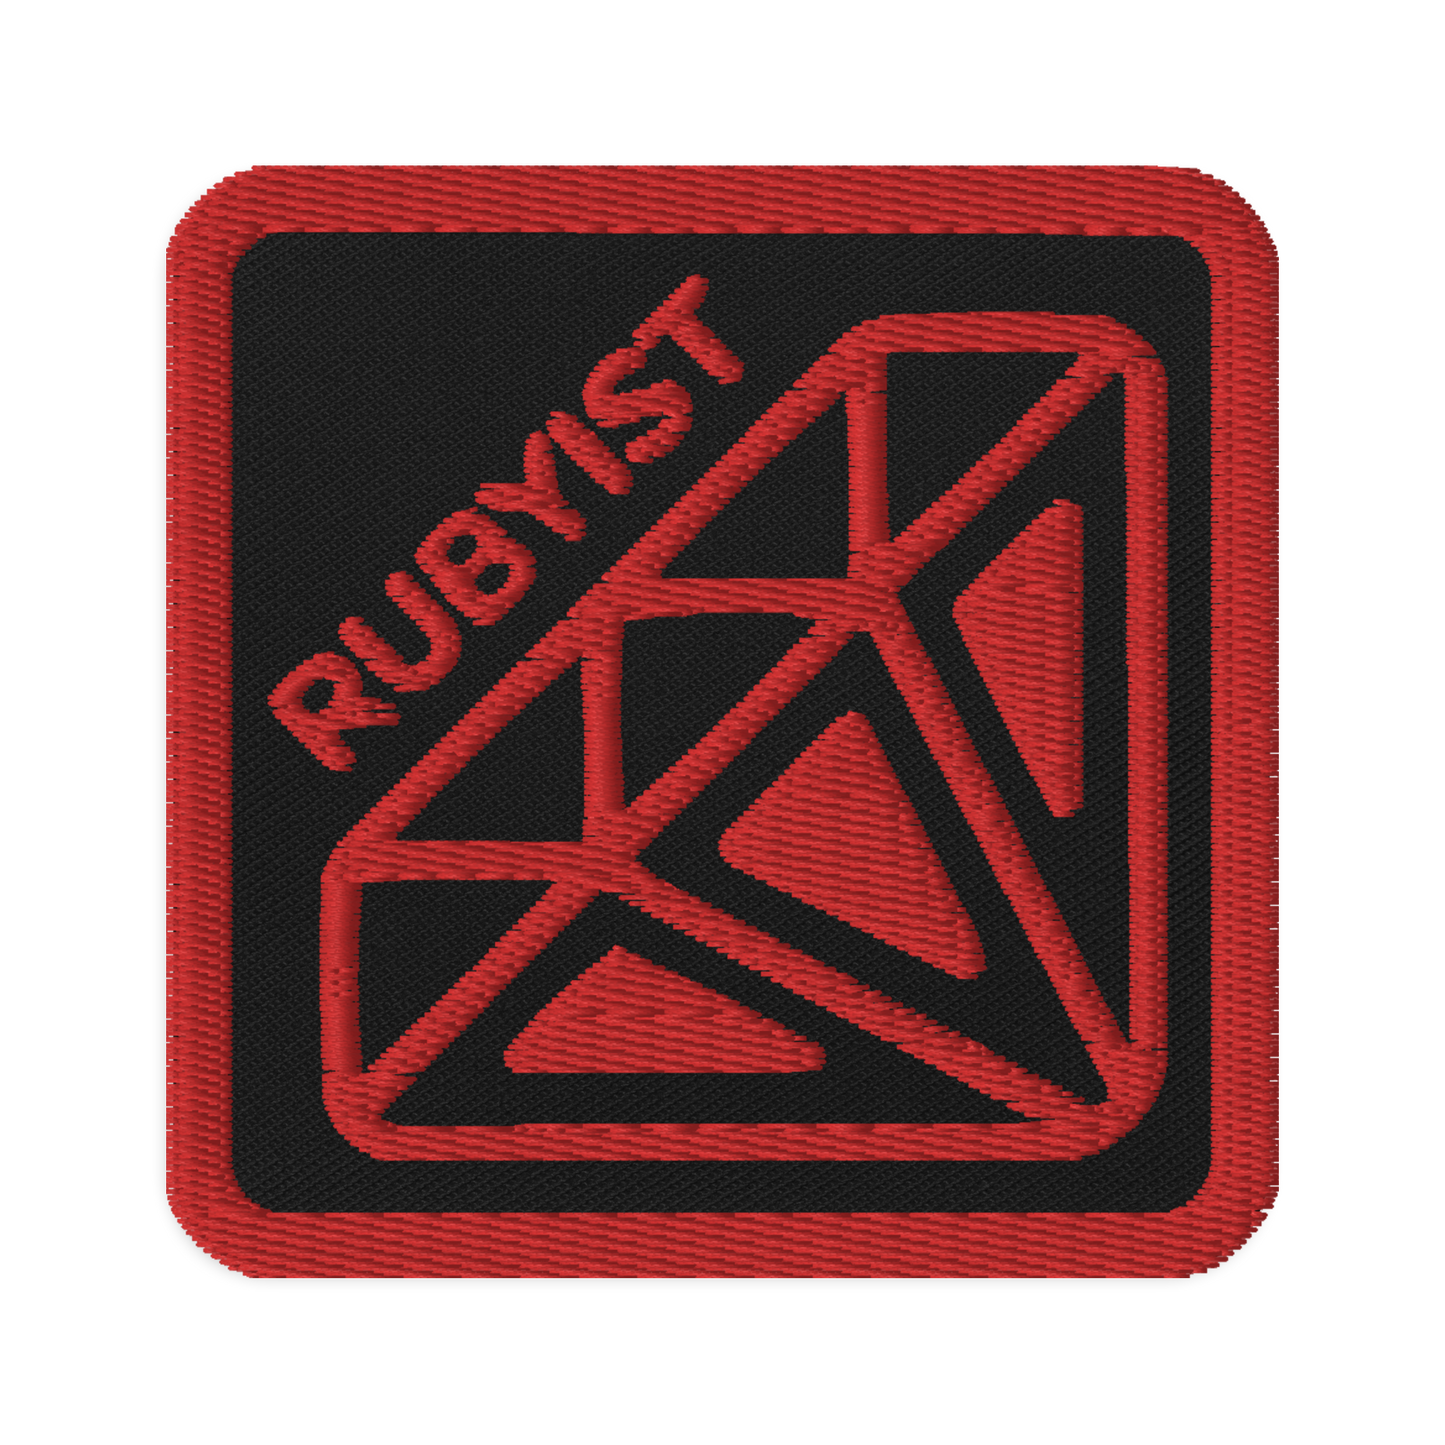 The Rubyist Patch